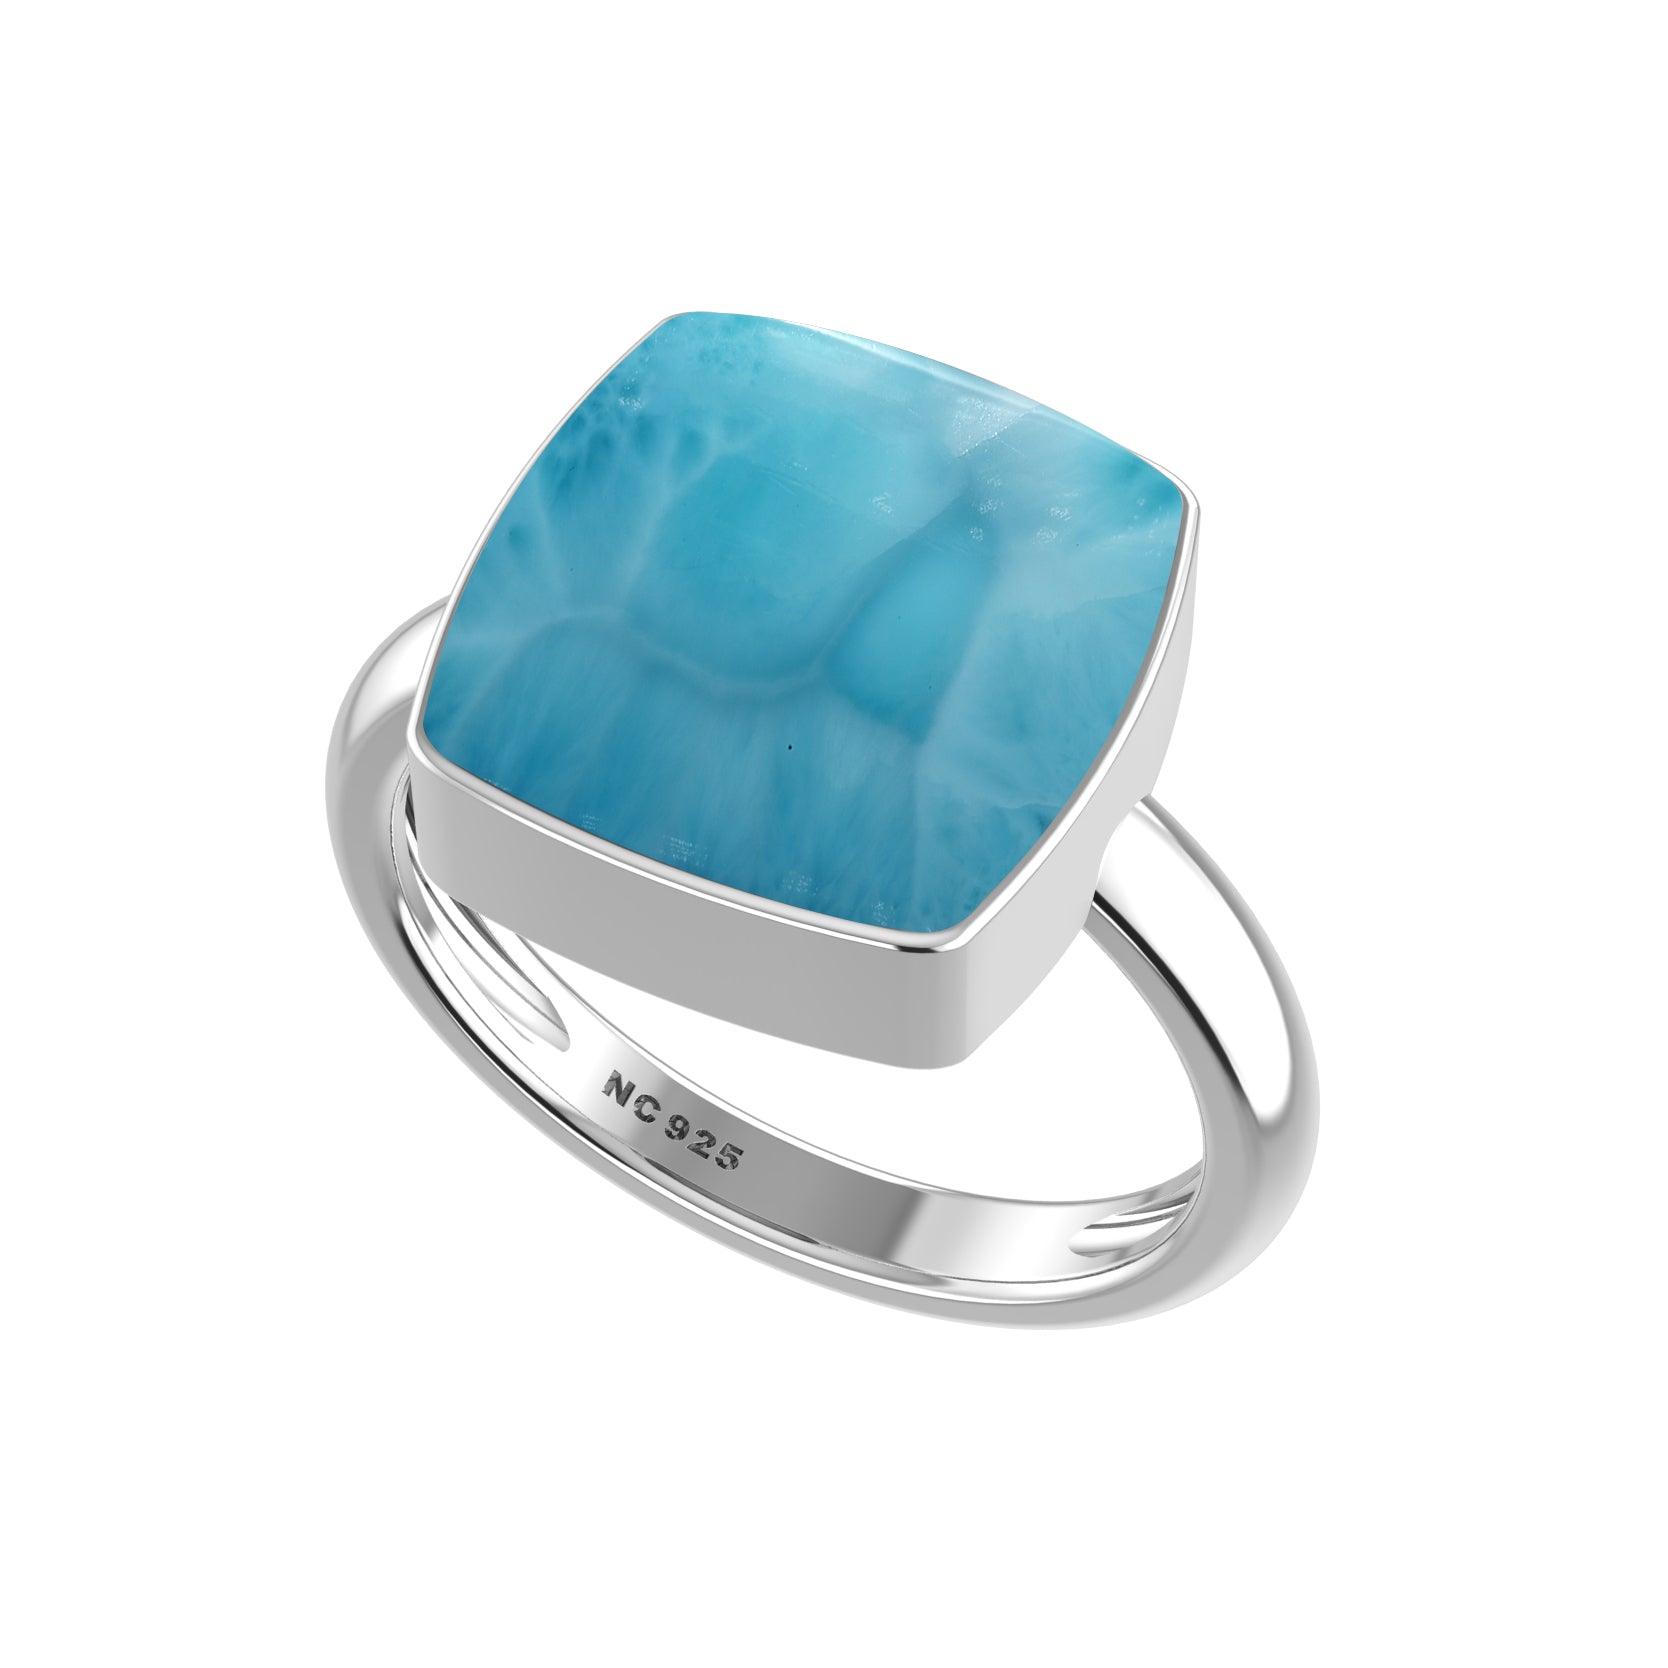 Natural Larimar Ring 925 Sterling Silver Bezel Set Handmade Jewelry Pack of 6 - (Box 2)